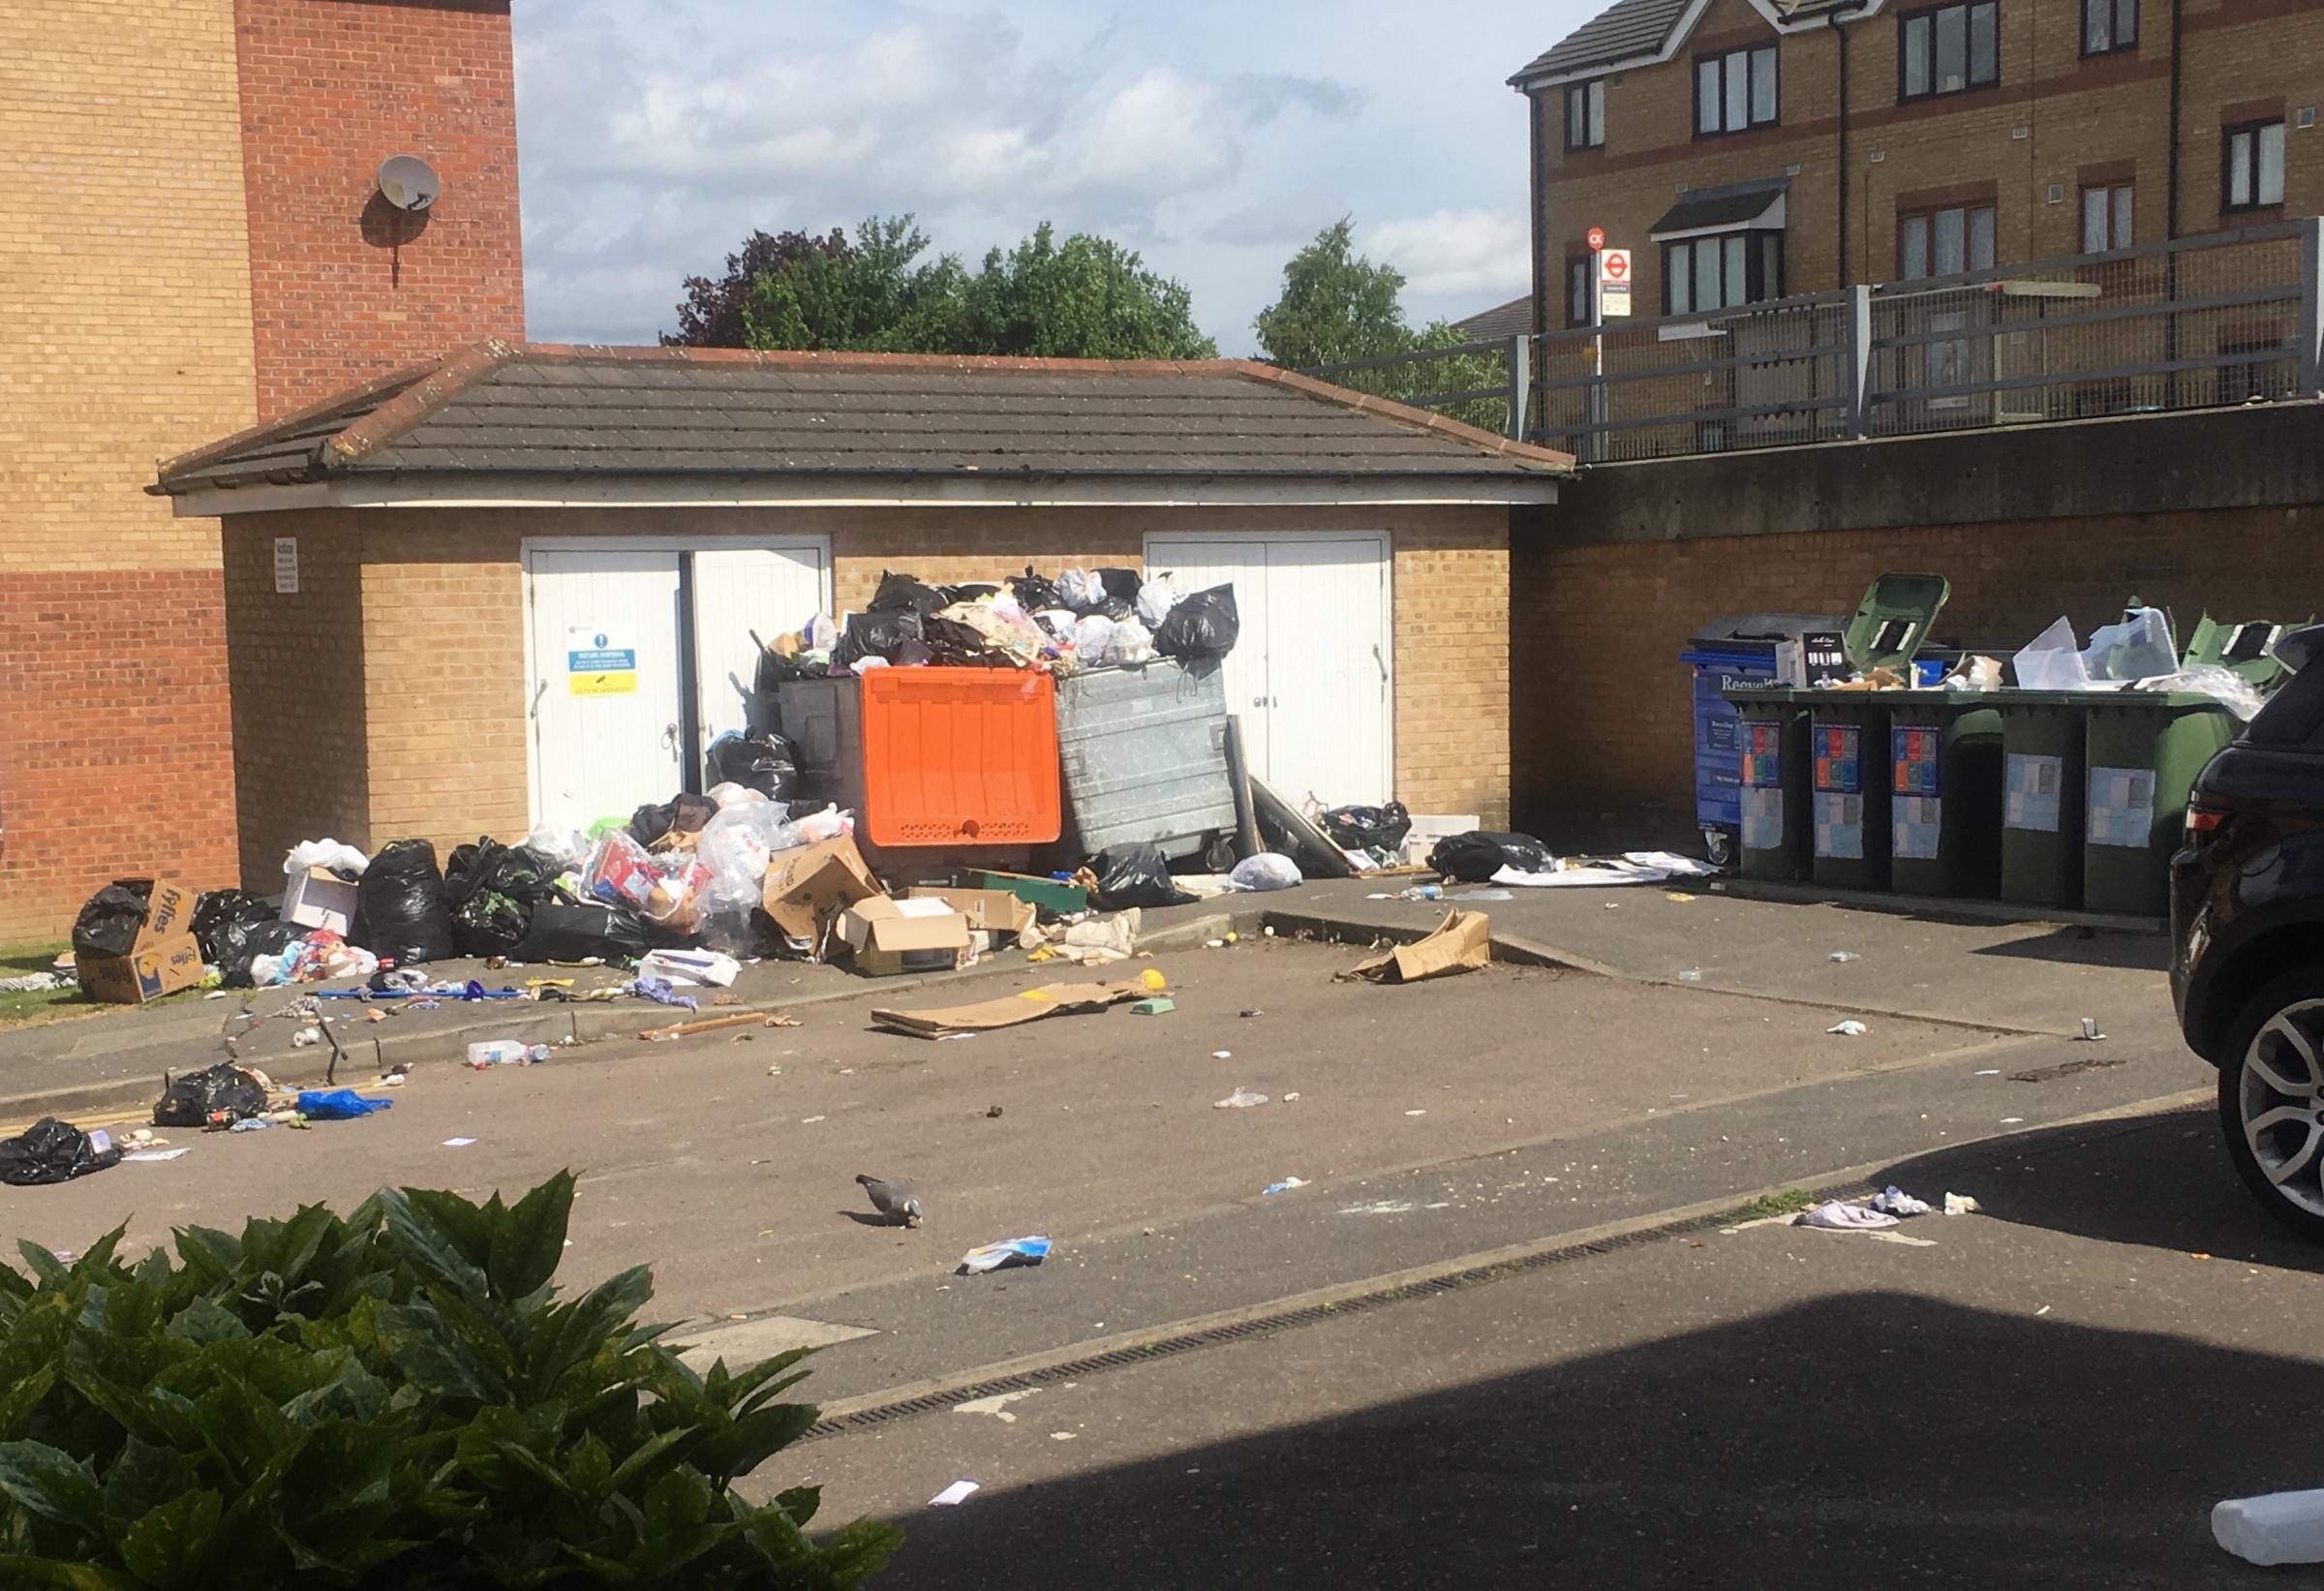 Fly-tipping in Handley Grove (submitted by Nicola Mann)